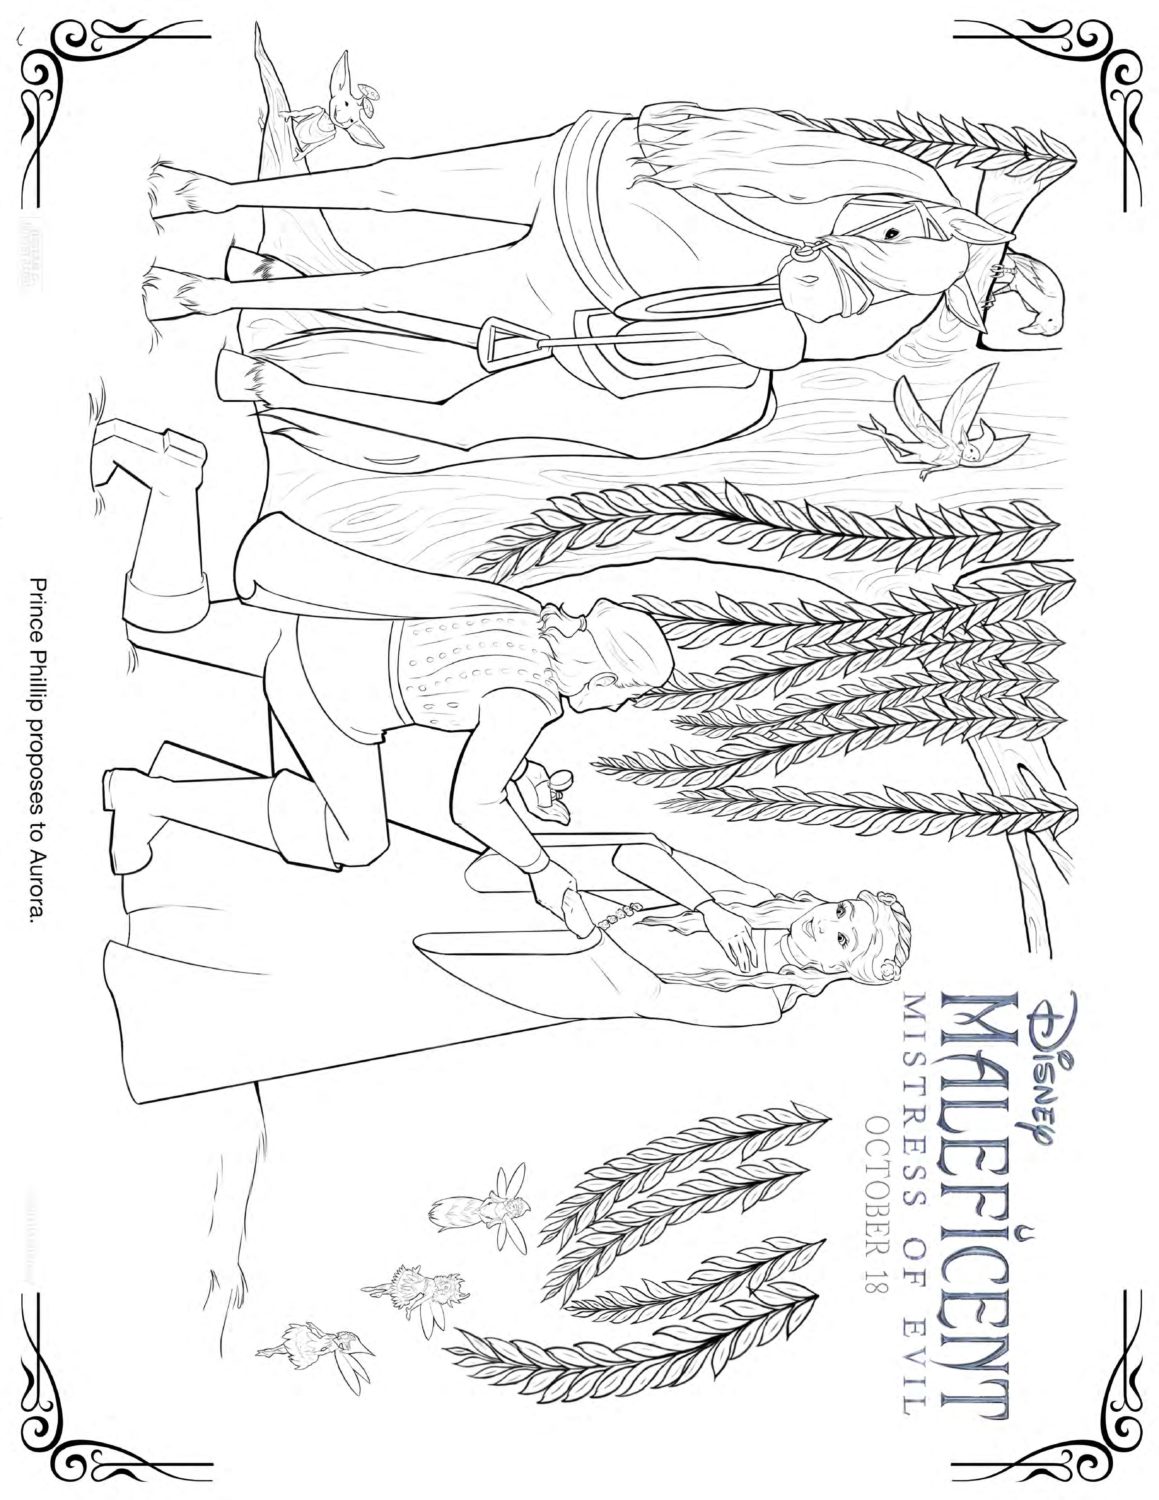 Maleficent 2 Prince Phillip Coloring Pages and Activity Sheets